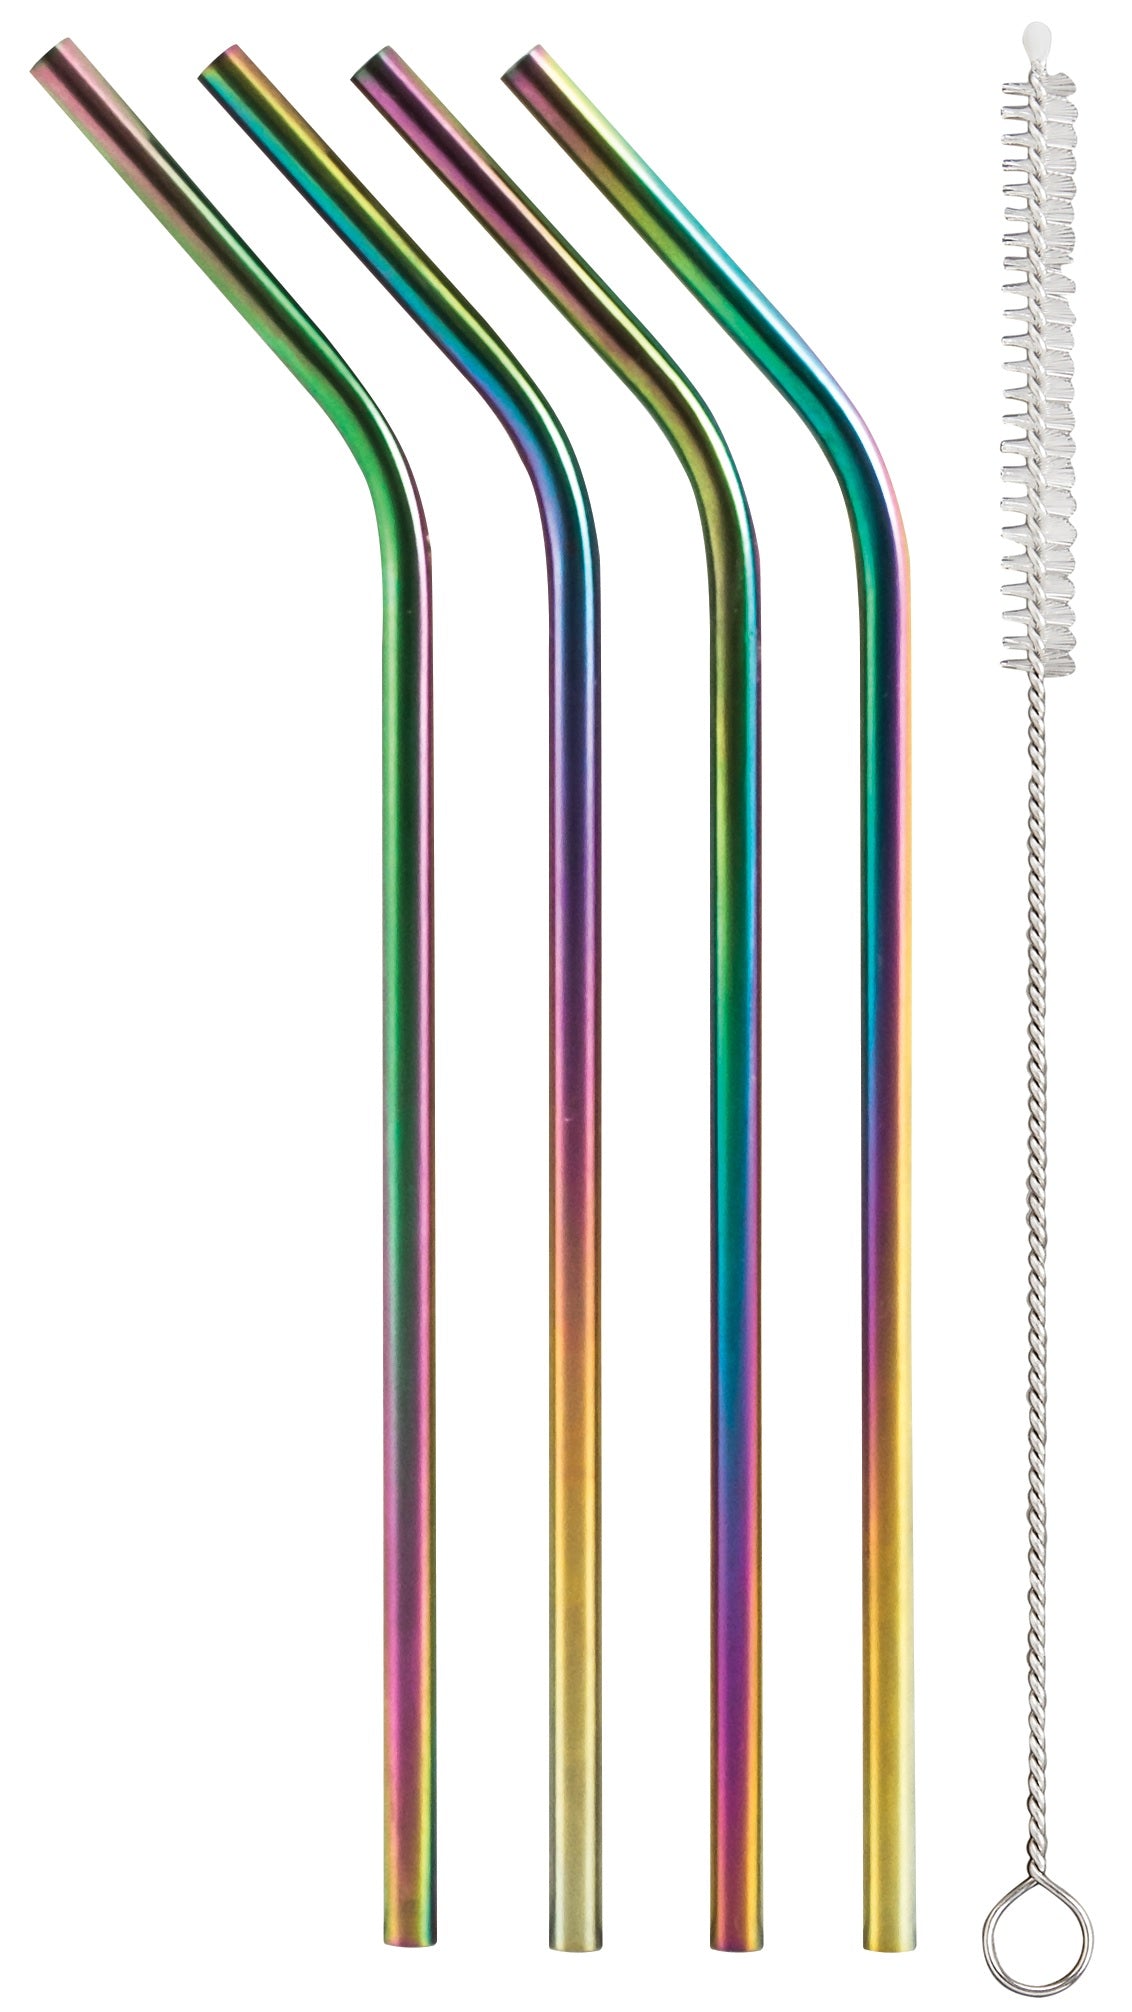 Harold Imports 42005 Rainbow Drinking Straw With Brush, Multicolored